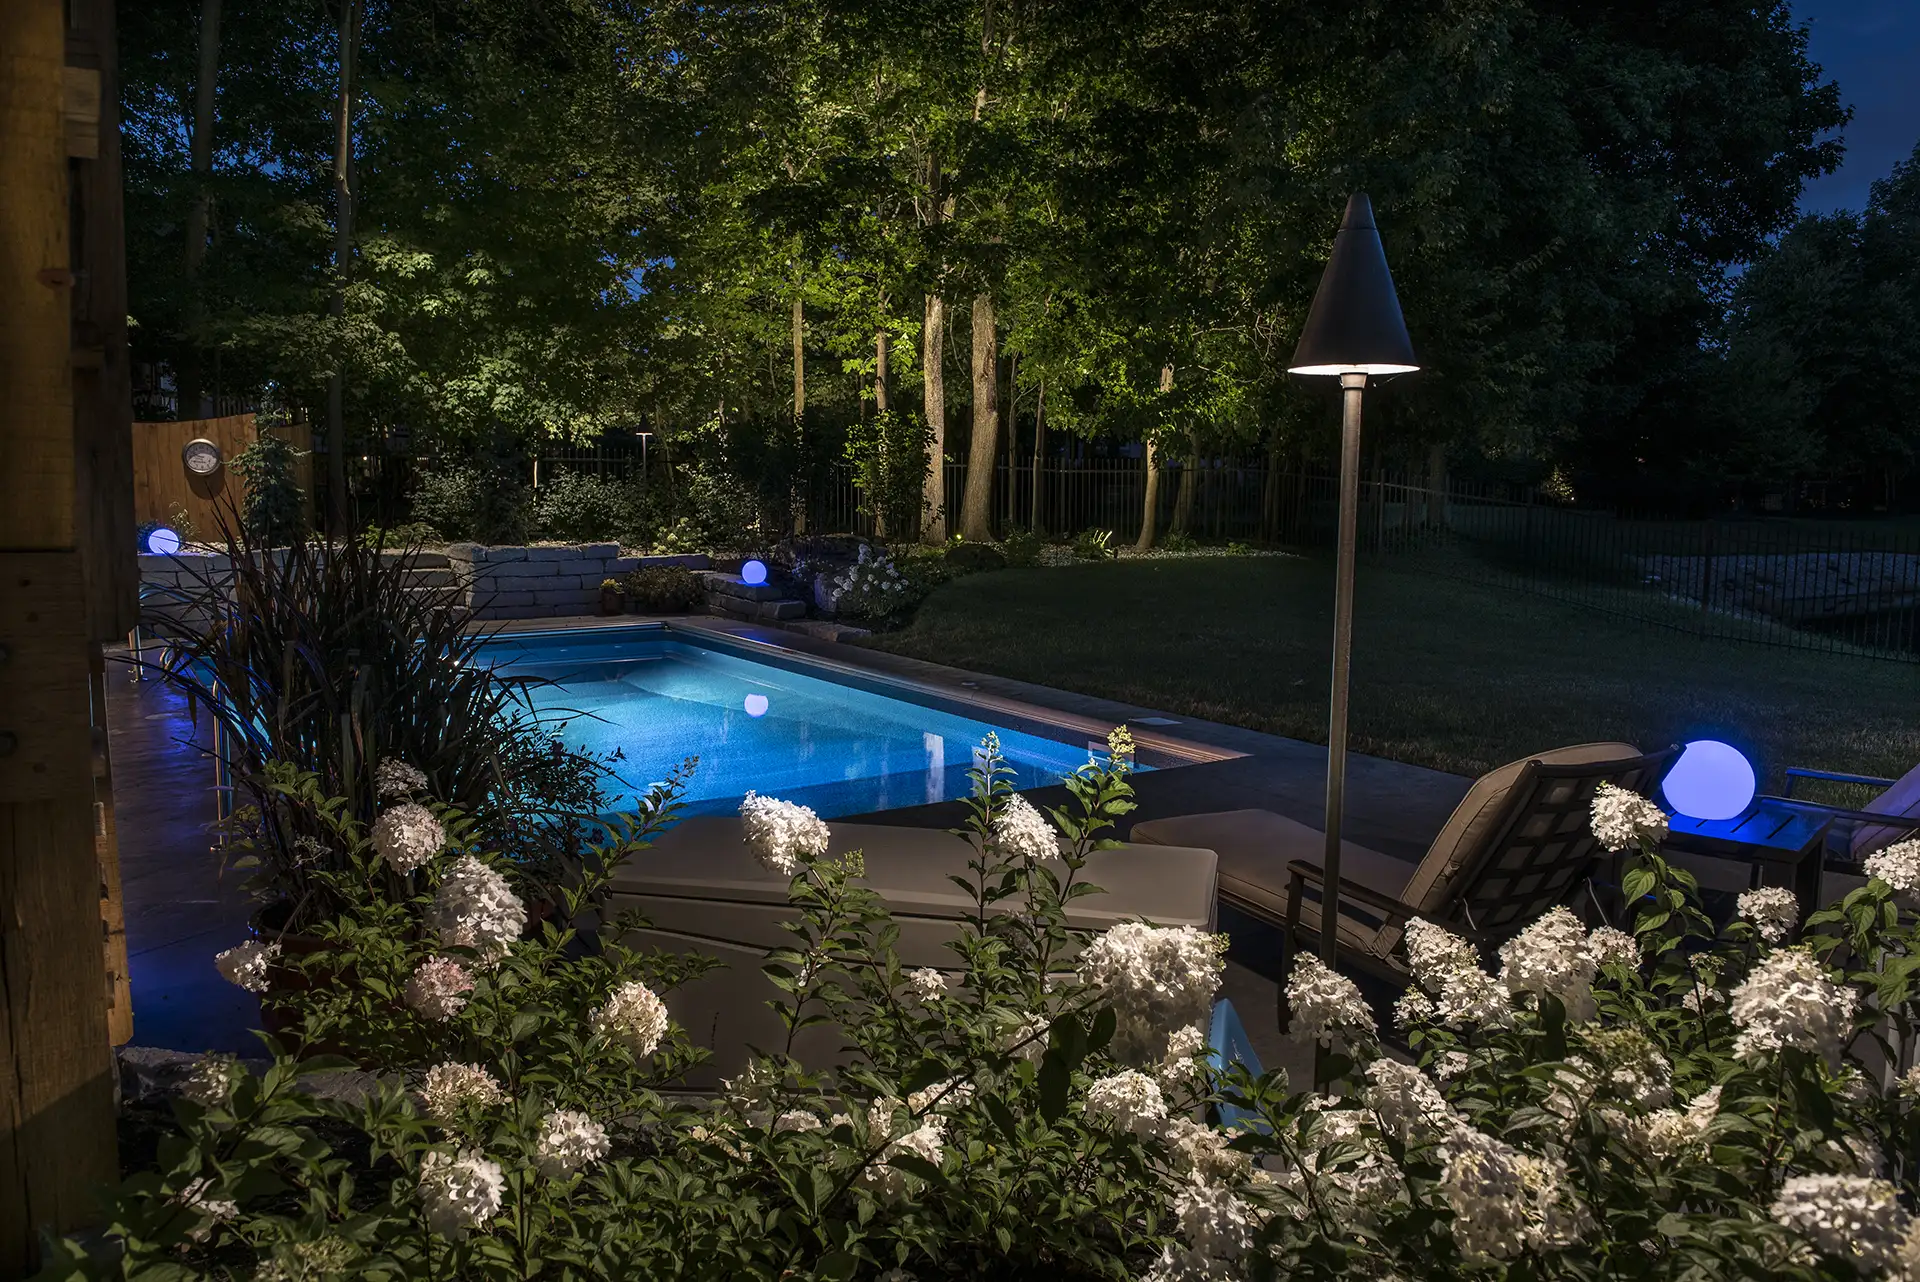 Fuson residence image 6 pool seating area flowers Lighthouse Outdoor Lighting and Audio Delaware